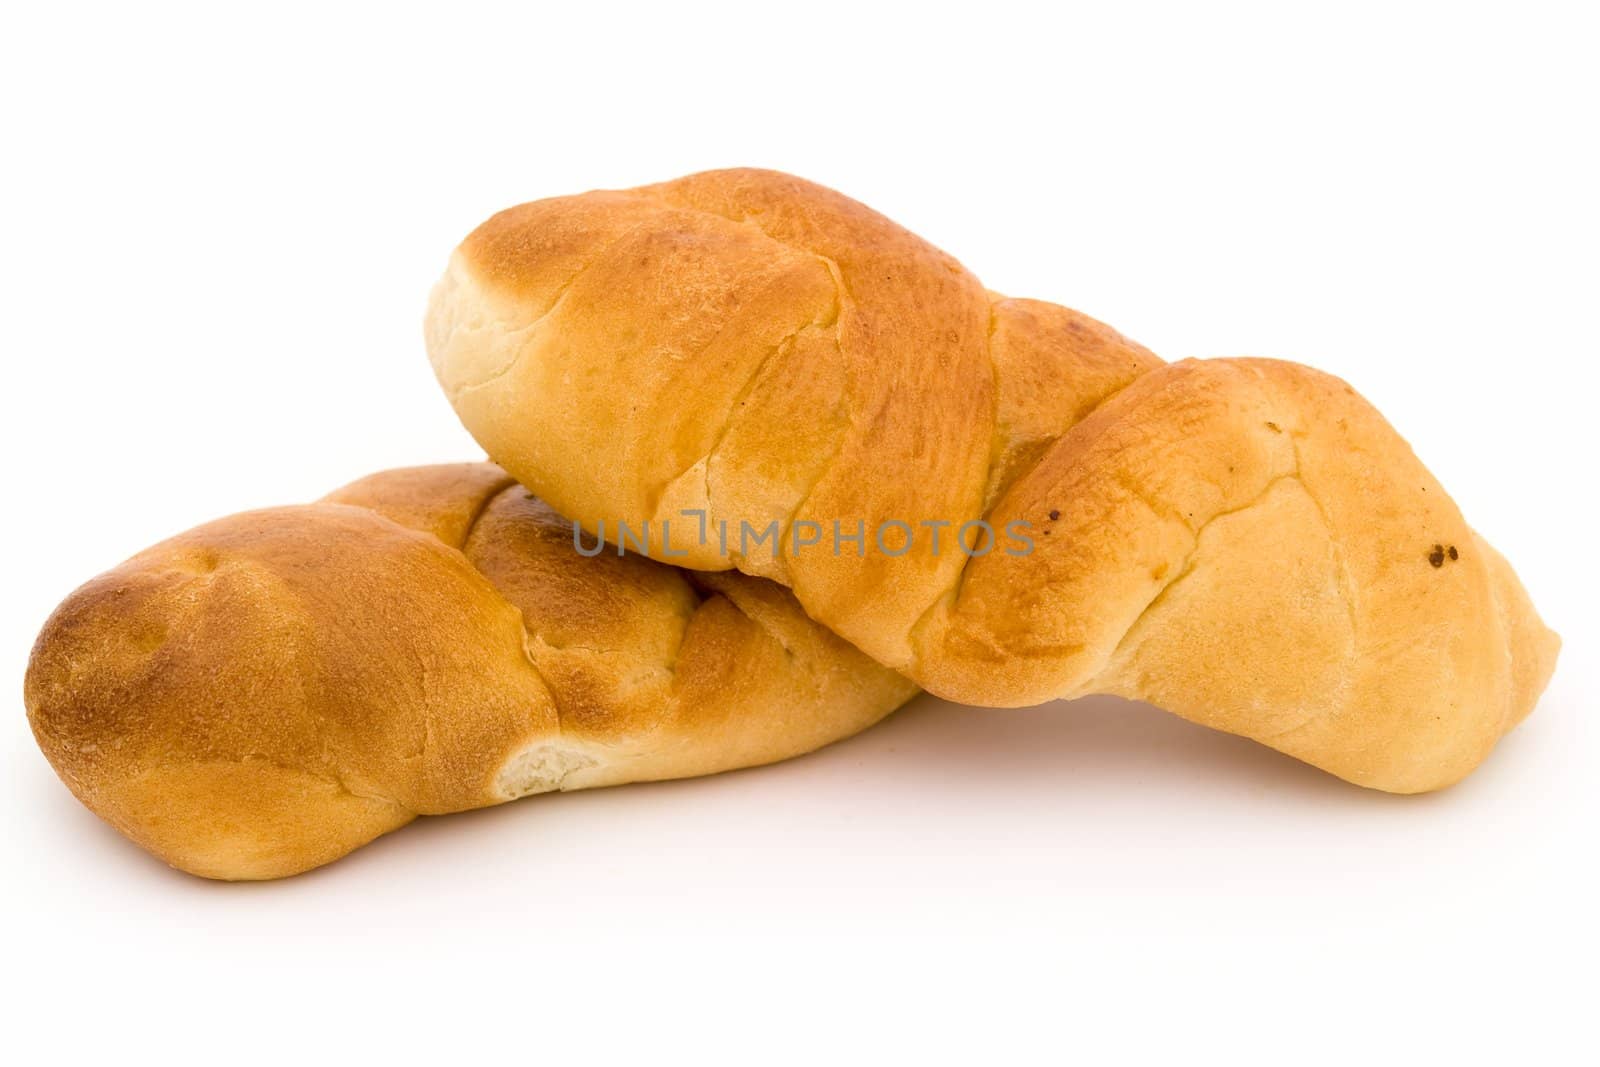 Appetizing buns on a white background